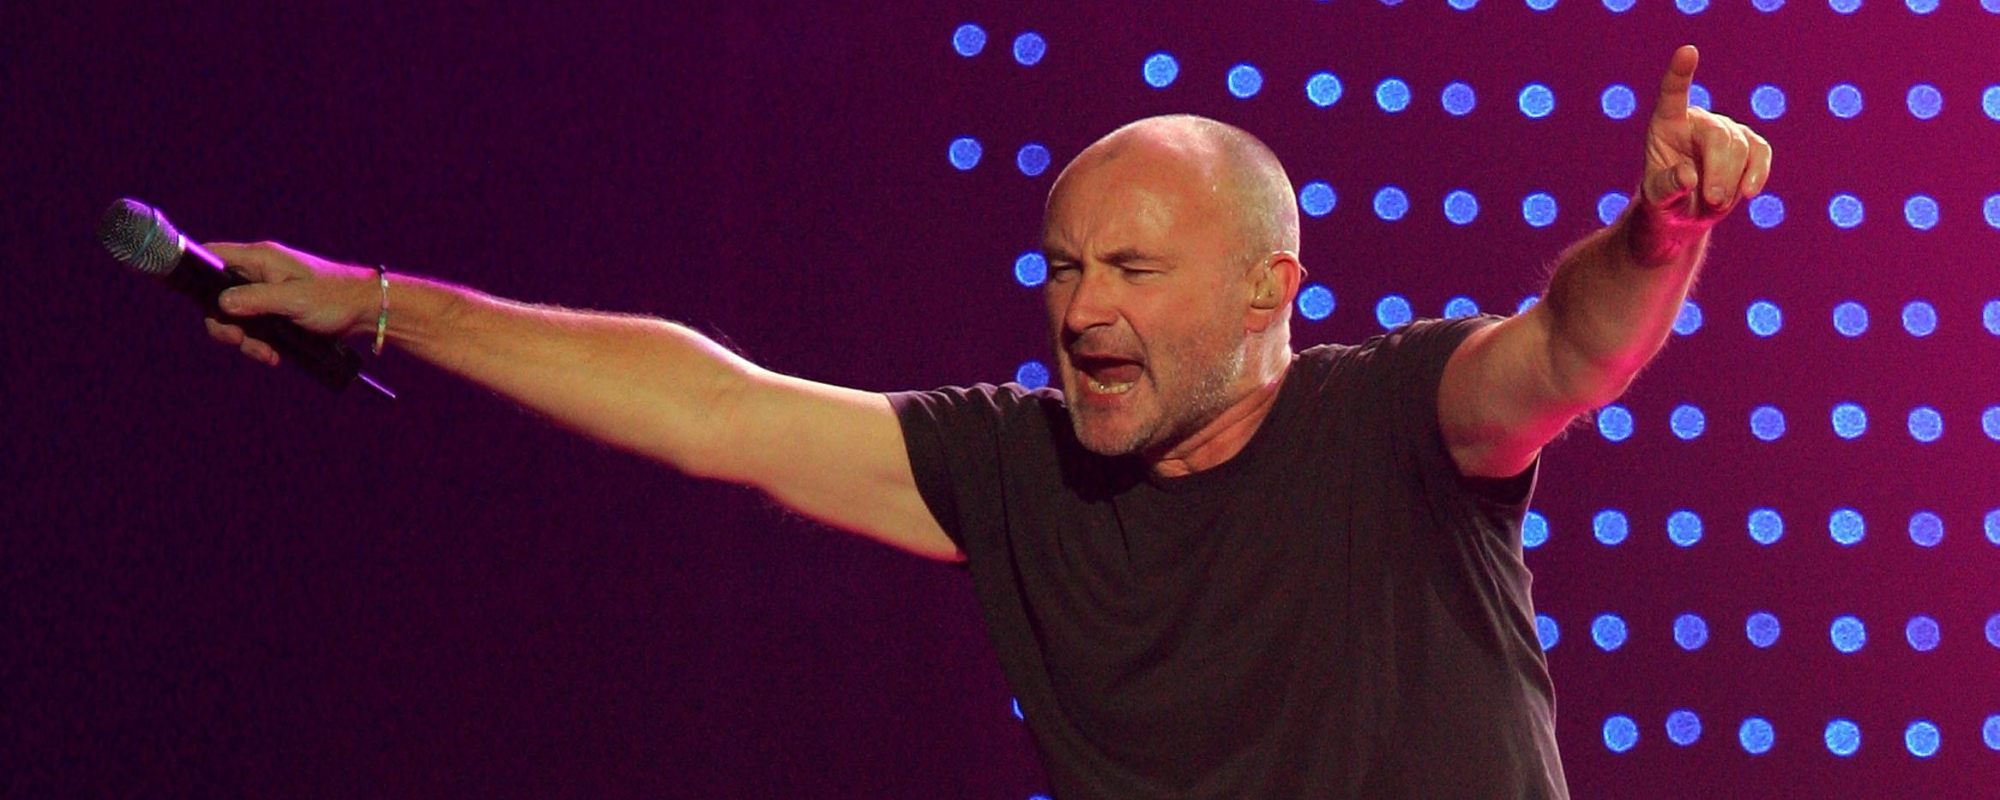 The Reverse-Engineering Behind the Meaning of Phil Collins’ “Sussudio”